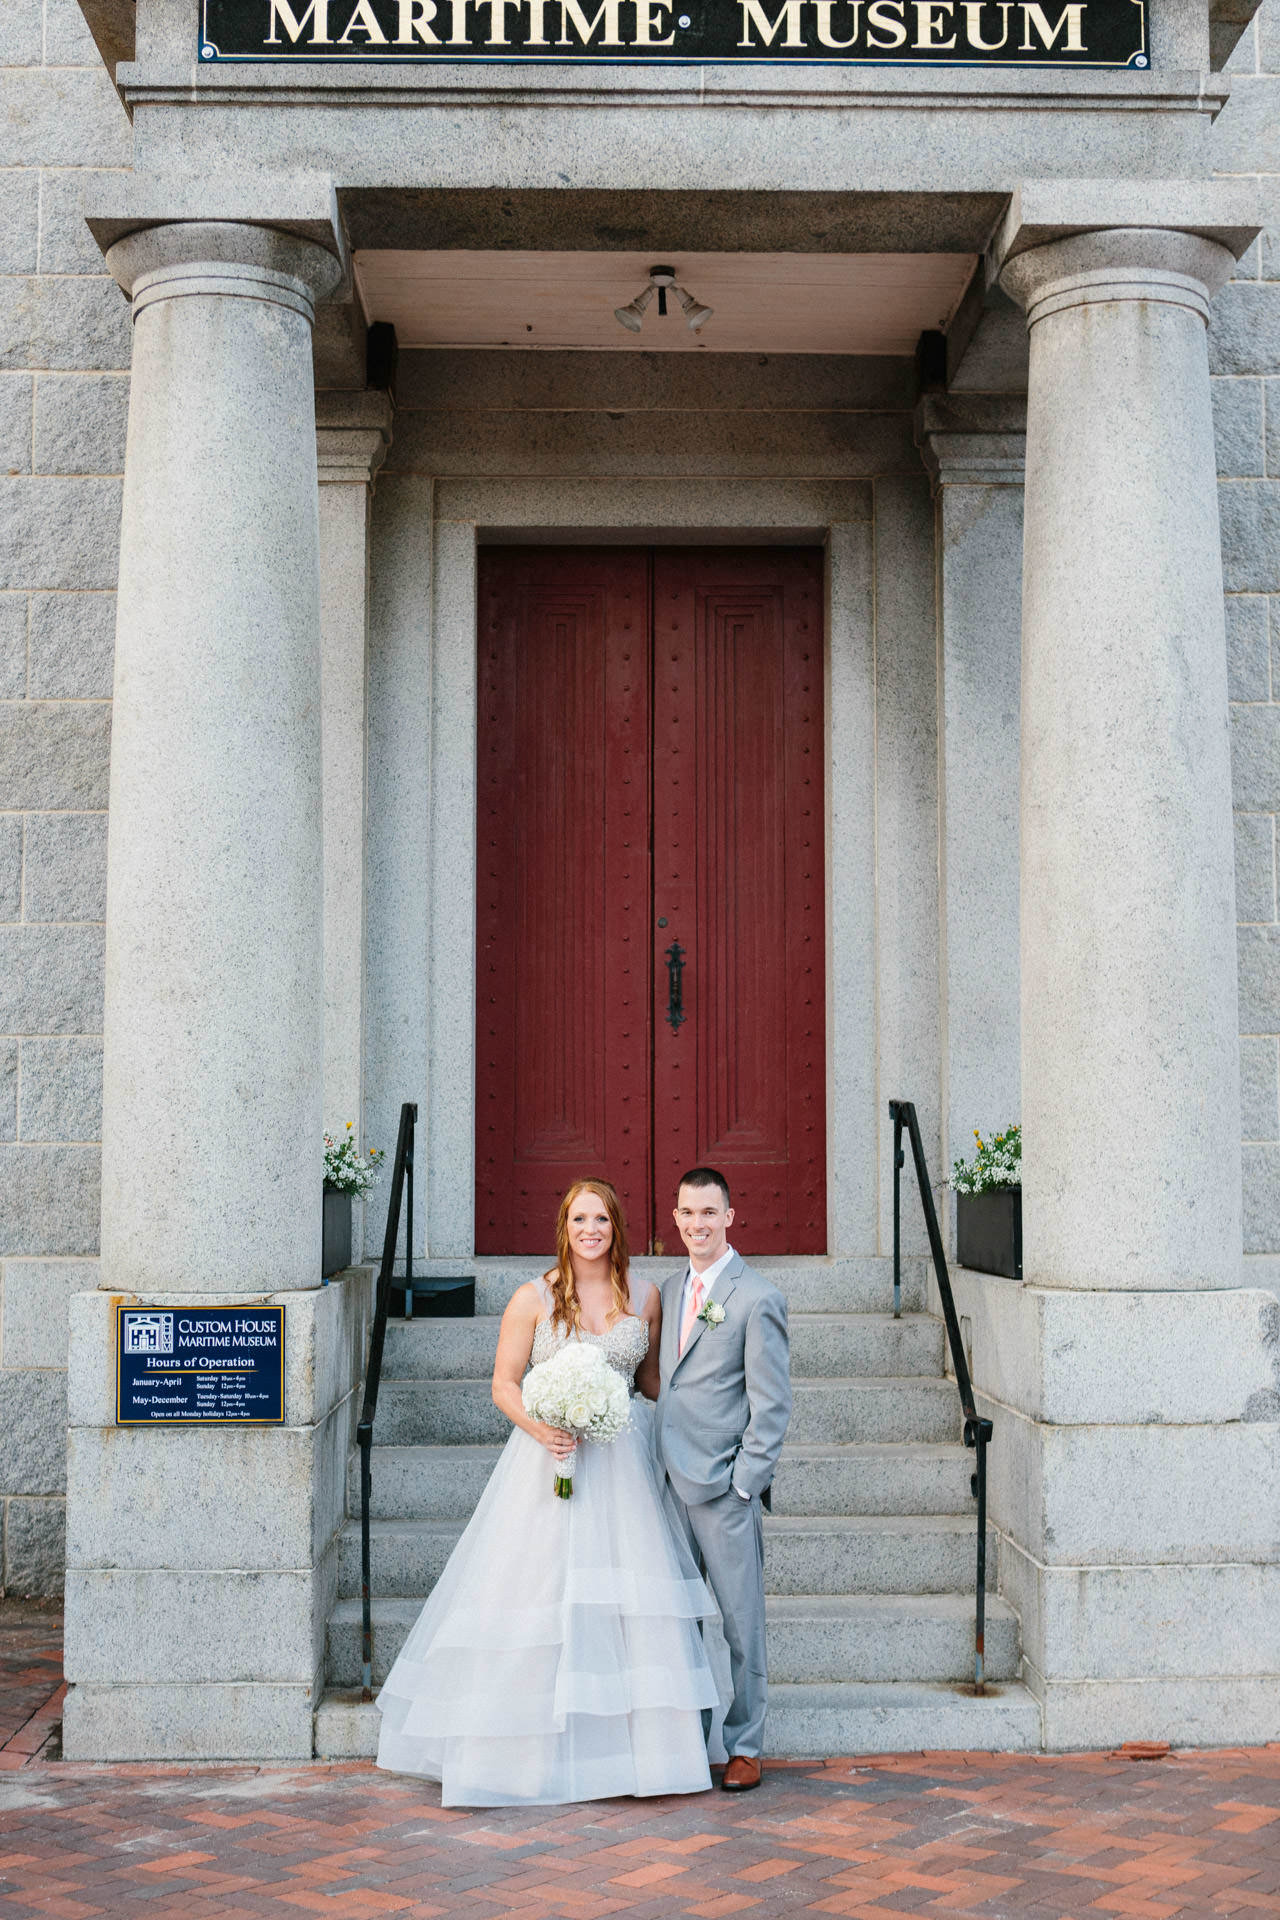 Bride and Groom standing in front of the Custom House Maritime Museum